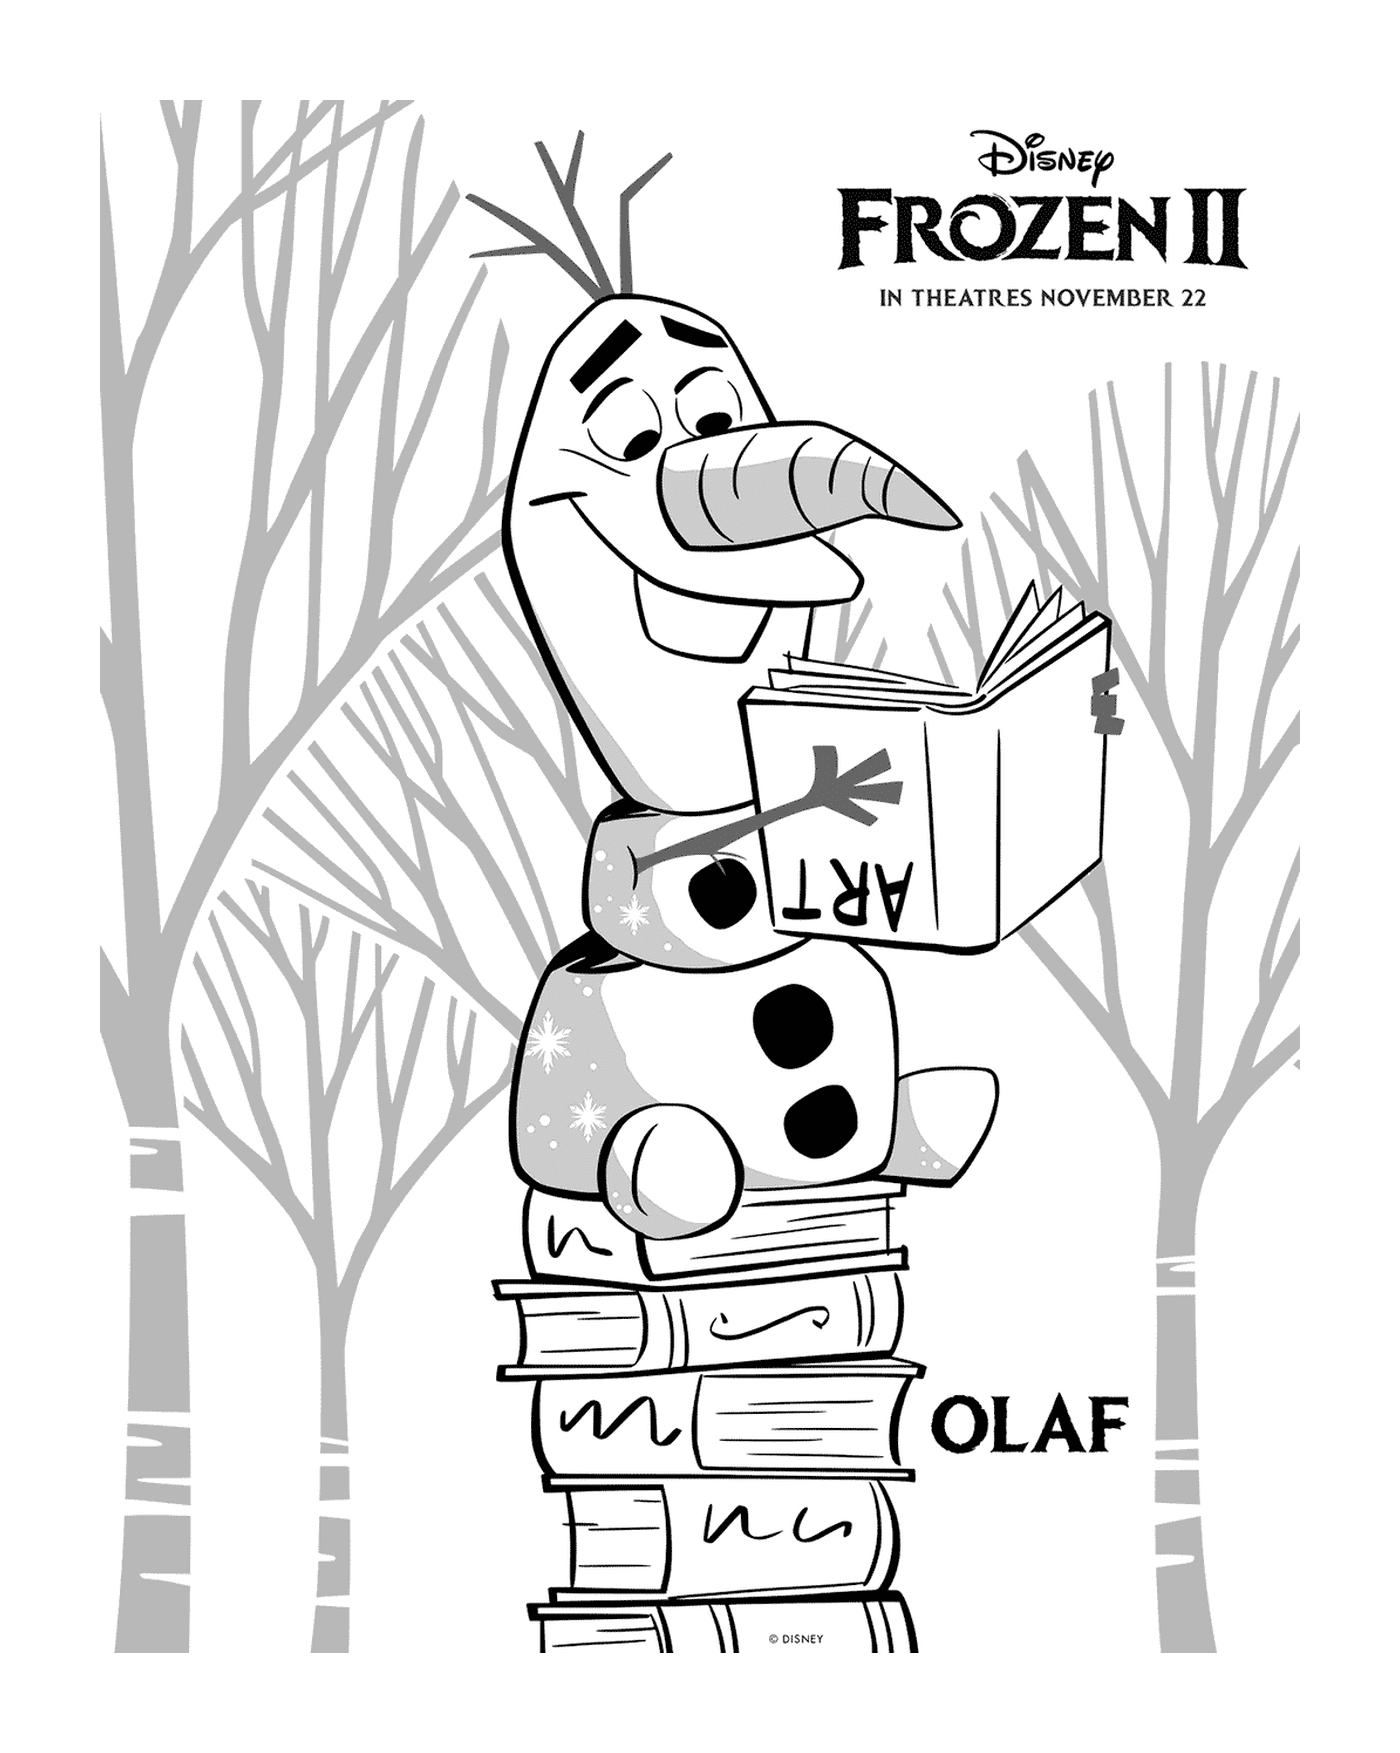  Olaf likes to read in Disney's Snow Queen 2 